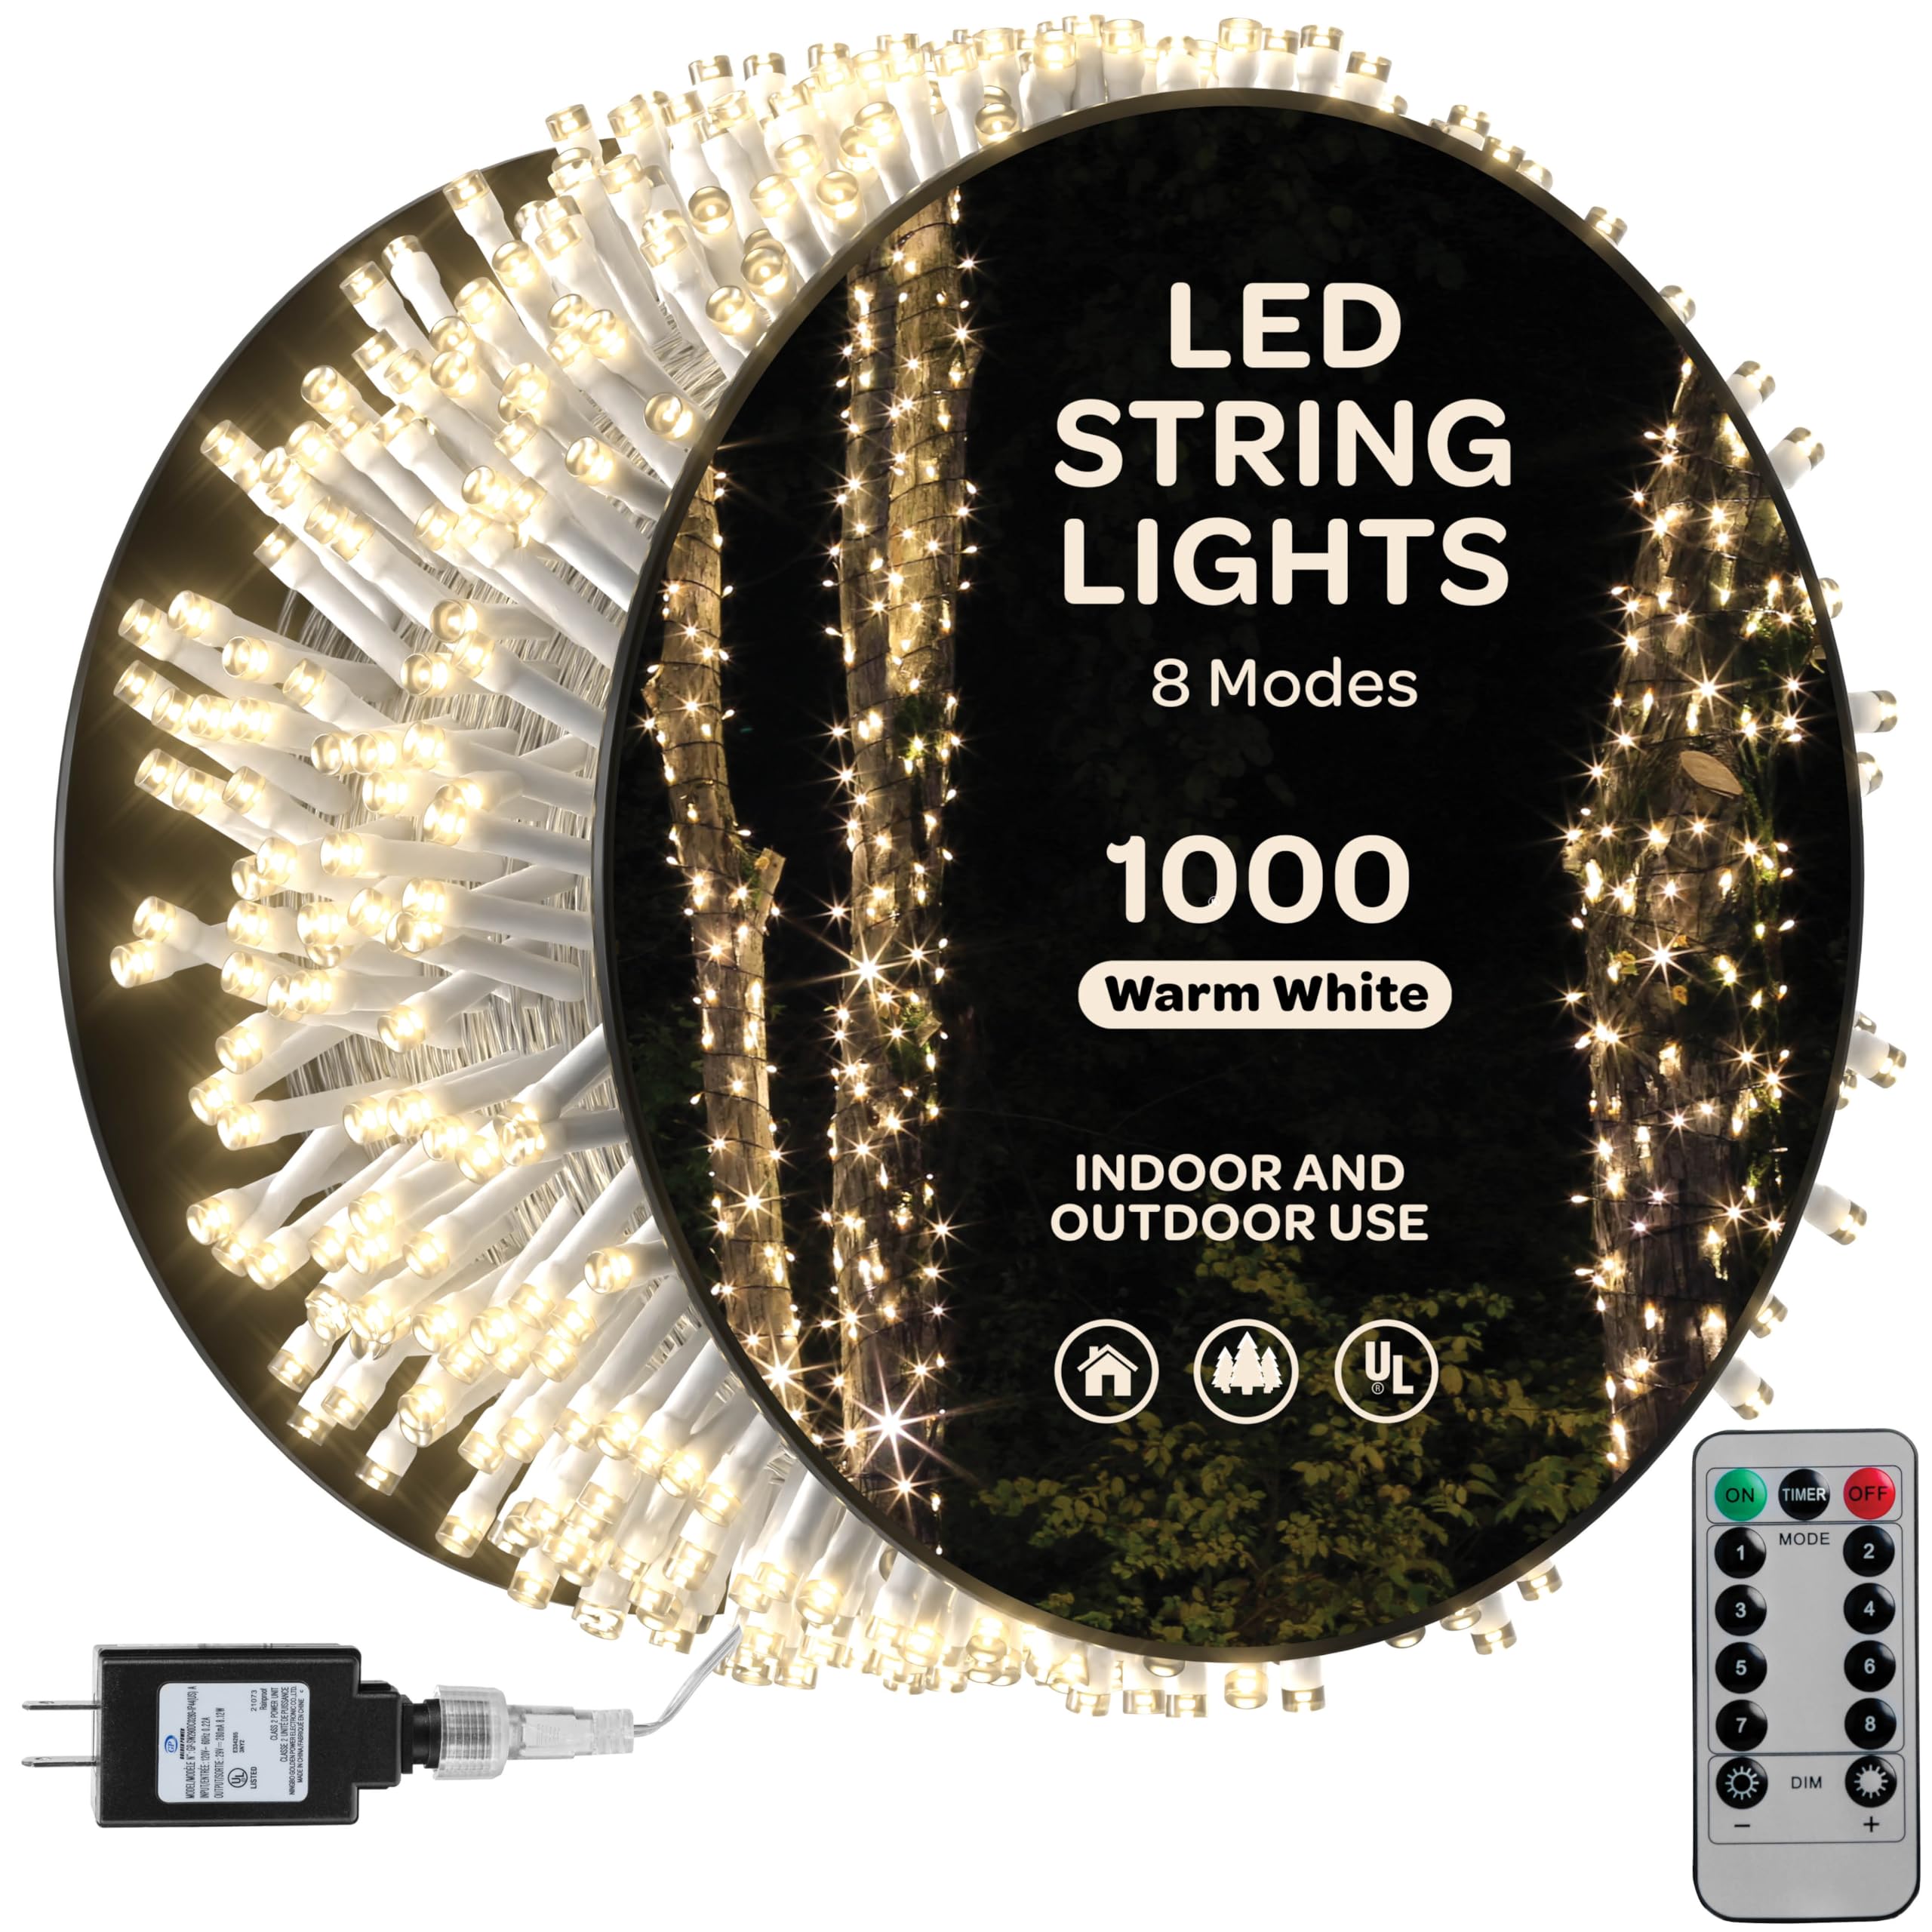 1000 LED Christmas Lights [Warm White] 400ft Super Long String Lights - Remote with 8 Modes/Timer/dimmable - UL Approved for Indoor/Outdoor Use - For Holiday/Christmas/Party/Decorations (clear wire)  - Like New